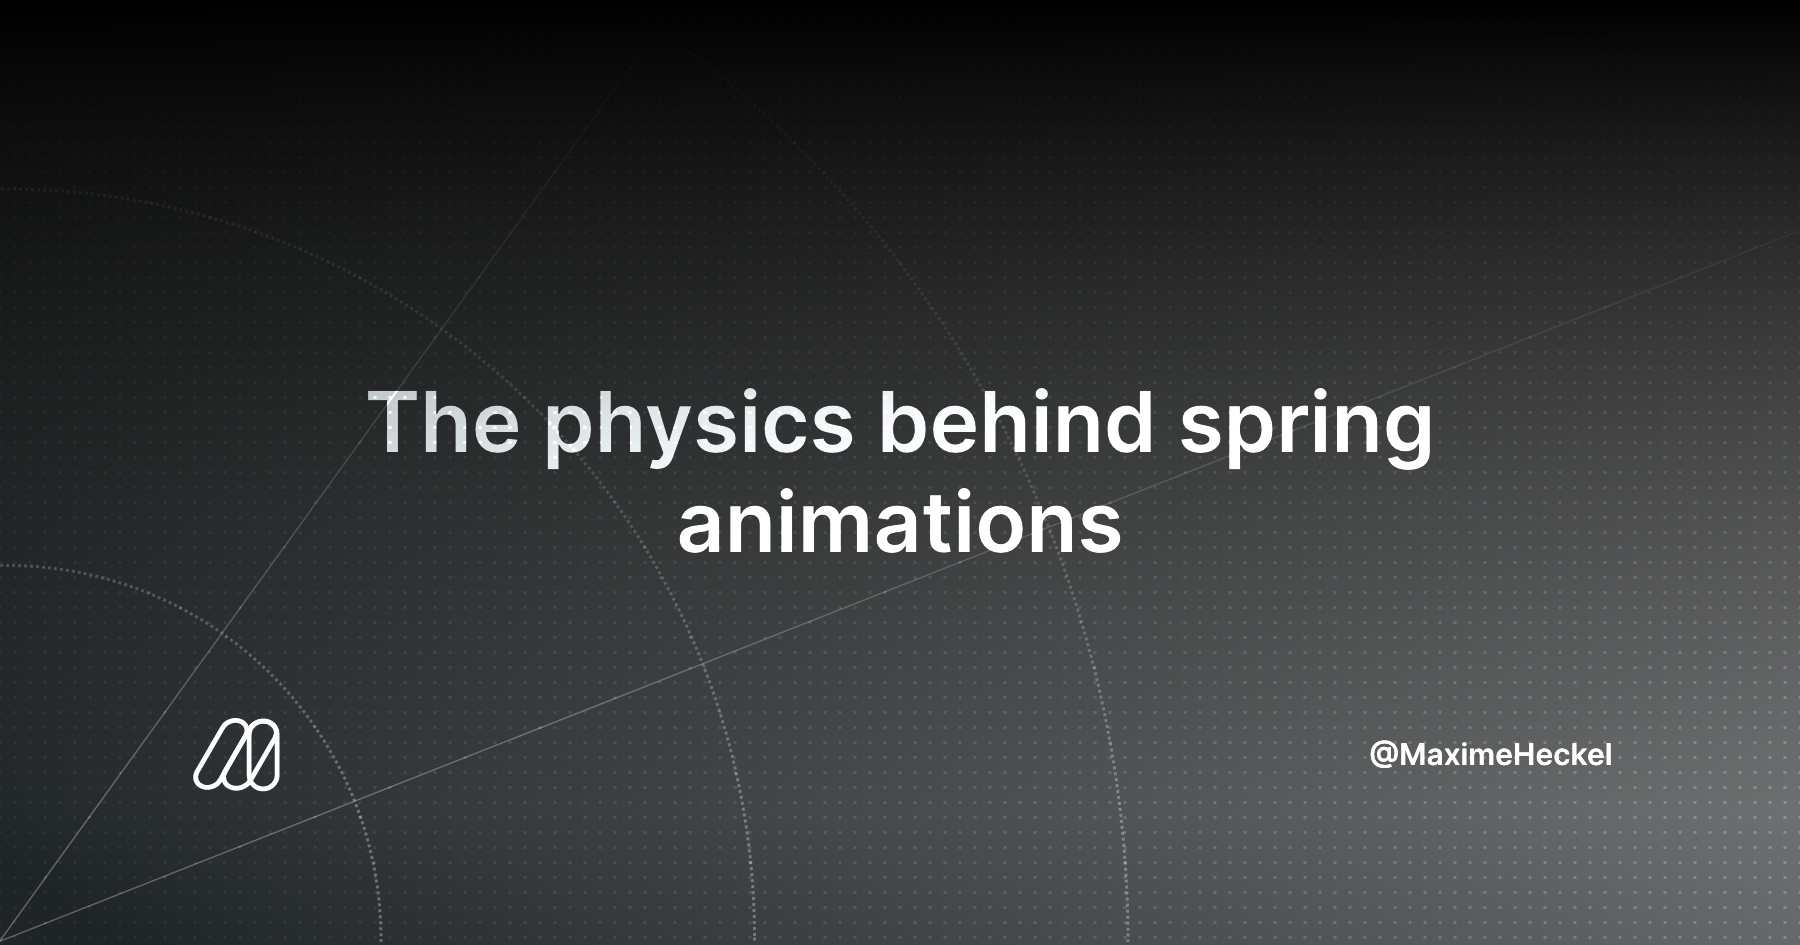 The physics behind spring animations - Maxime Heckel's Blog